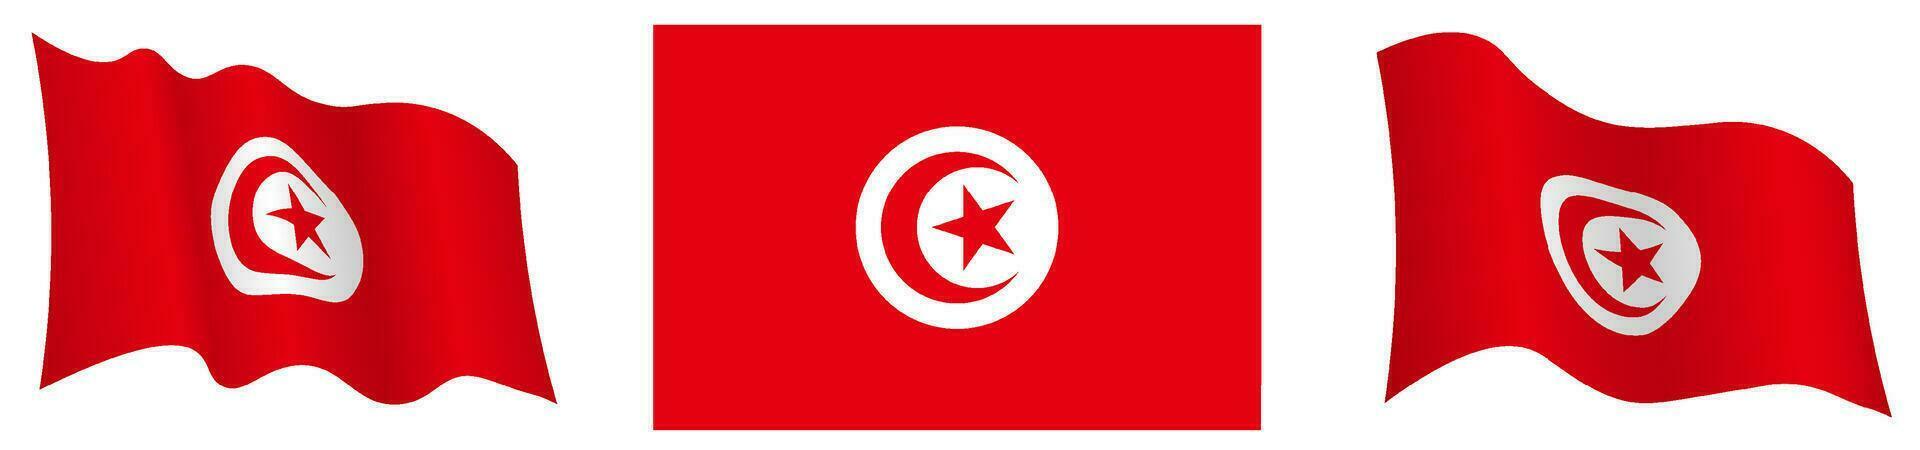 Republic of Tunisia flag in static position and in motion, fluttering in wind in exact colors and sizes, on white background vector